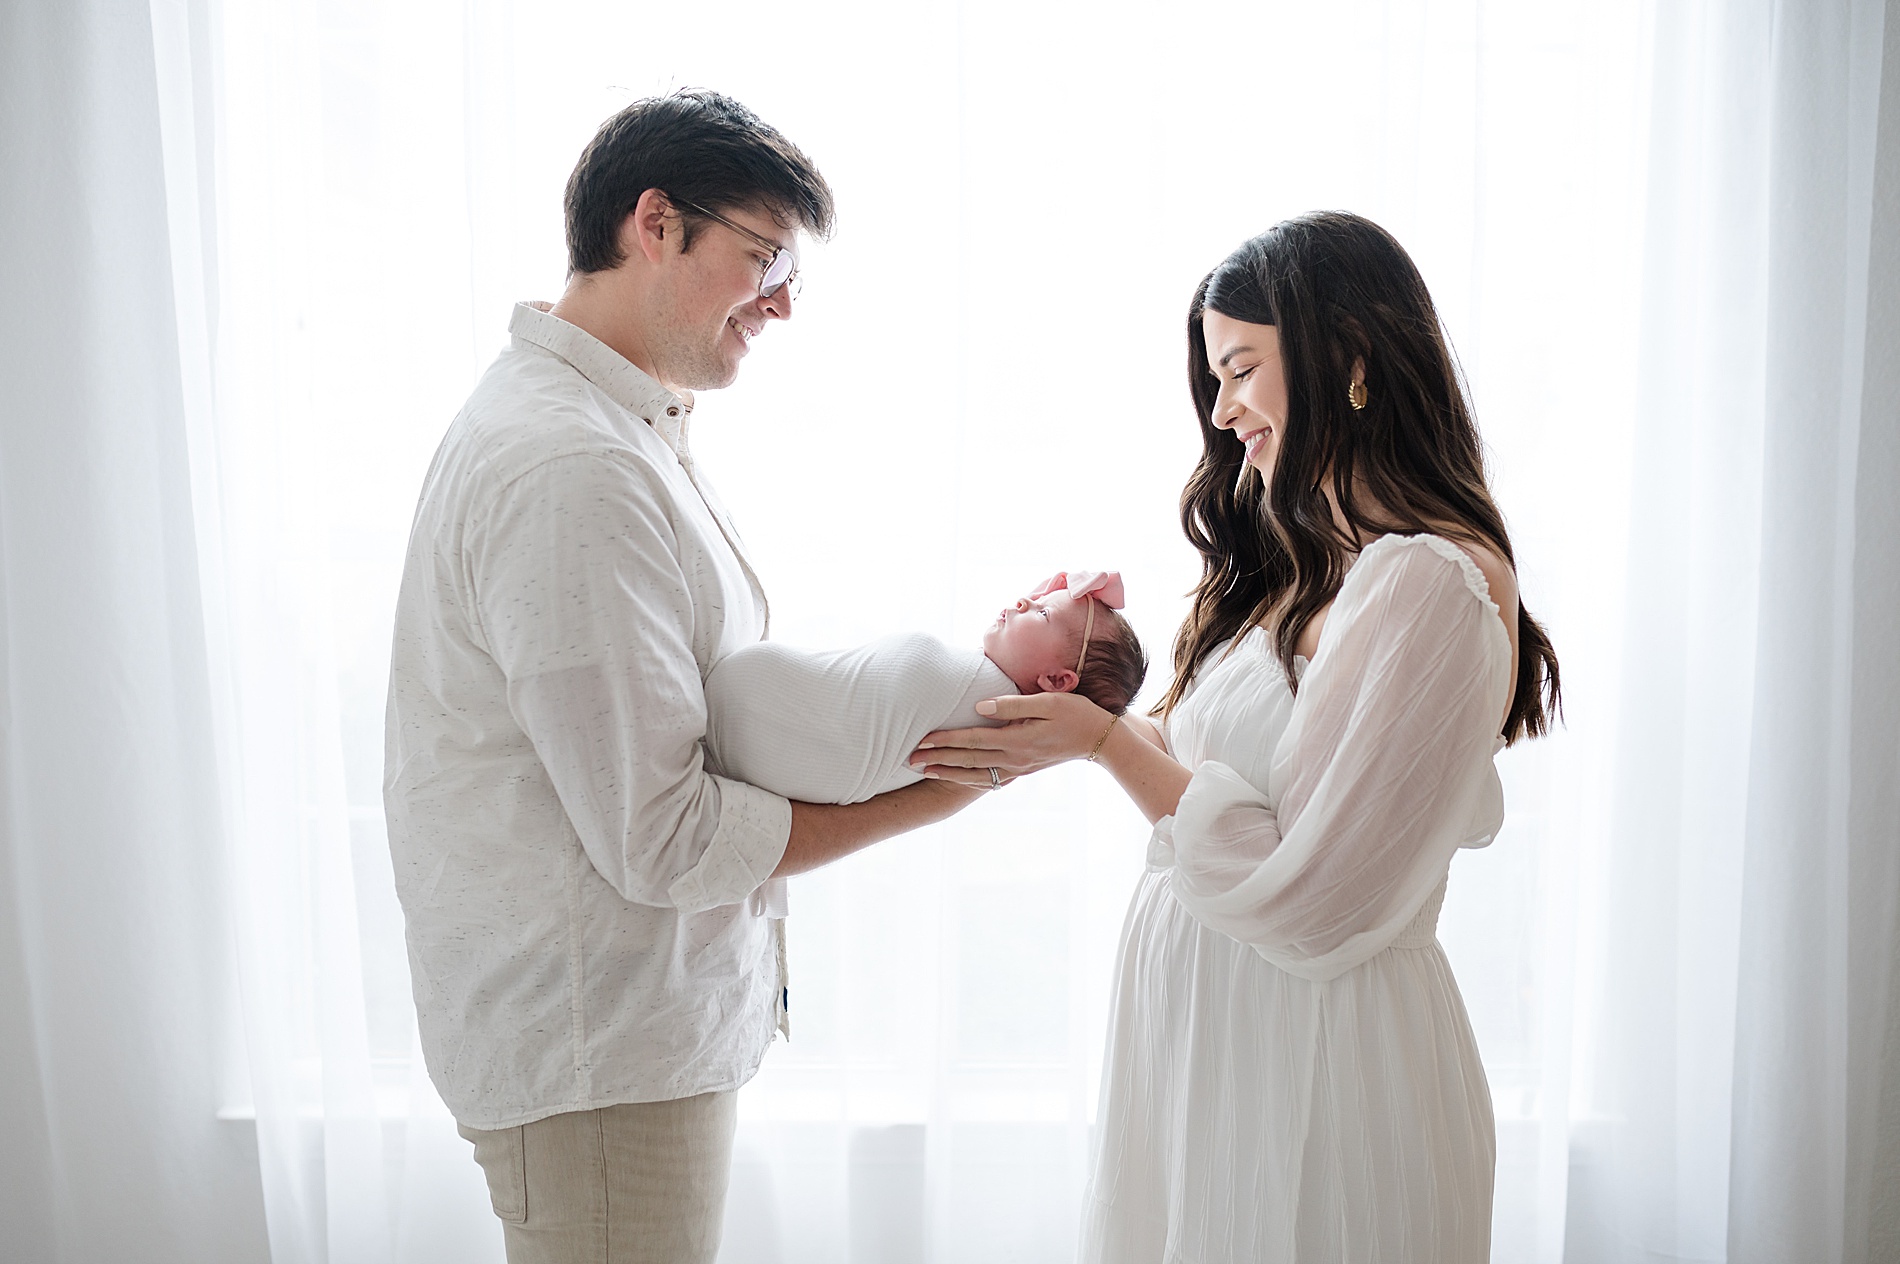 light and airy newborn portraits | using white in newborn photos photographed by Lindsey Dutton Photography, a Dallas newborn photographer
